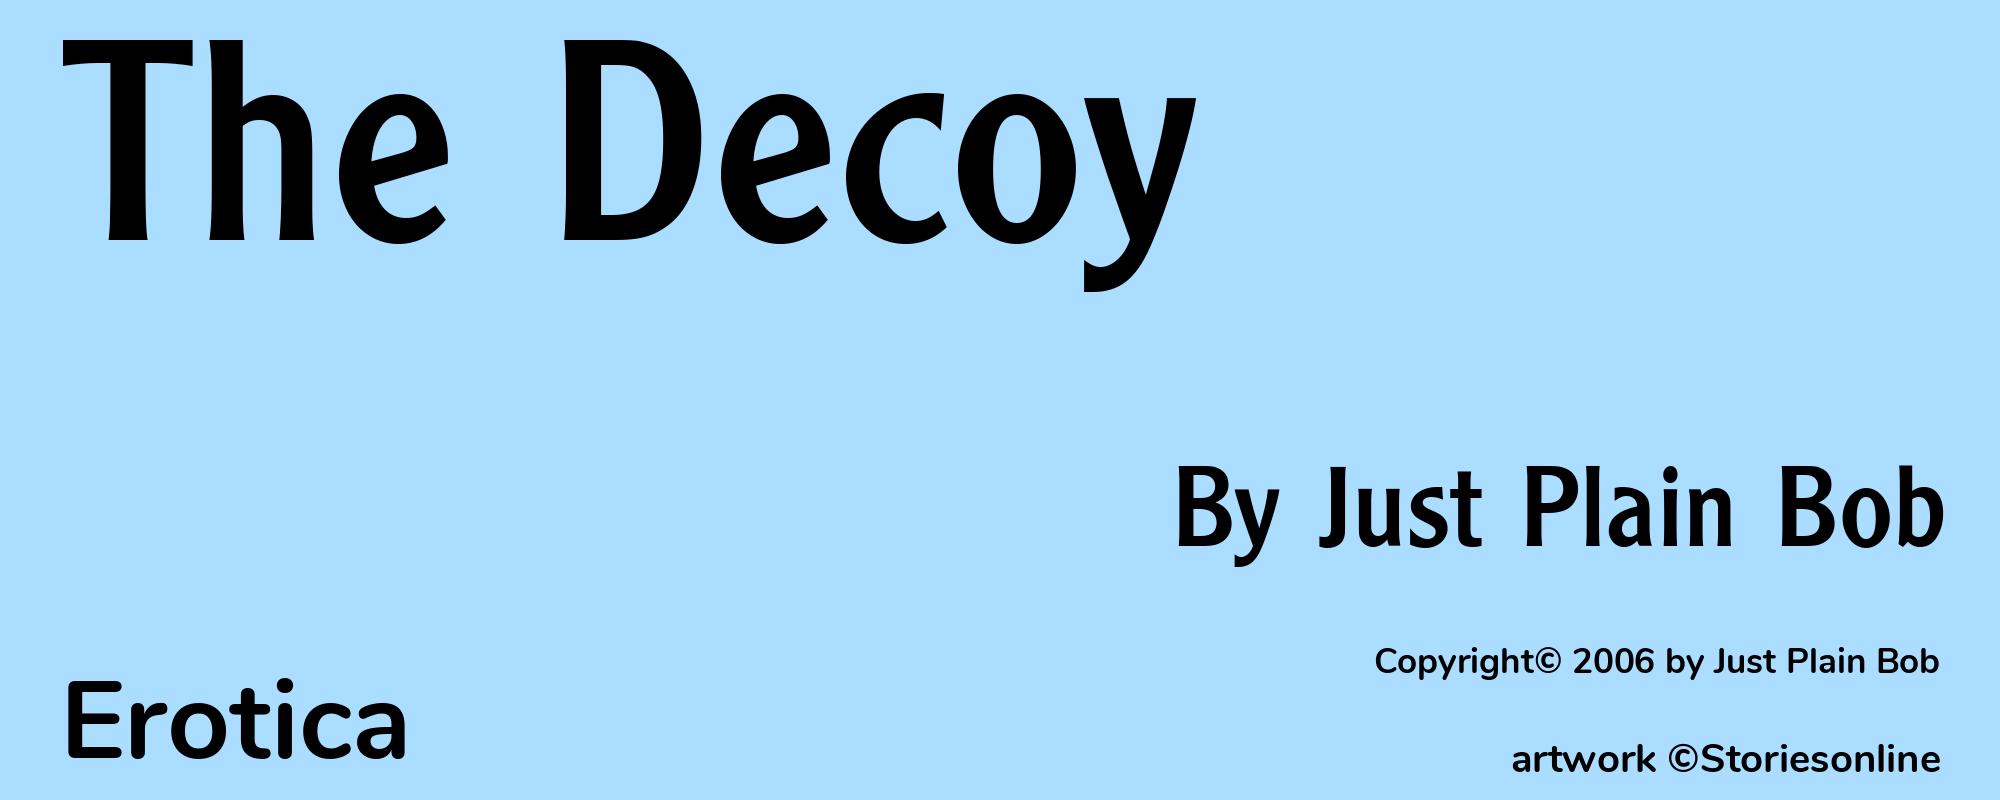 The Decoy - Cover